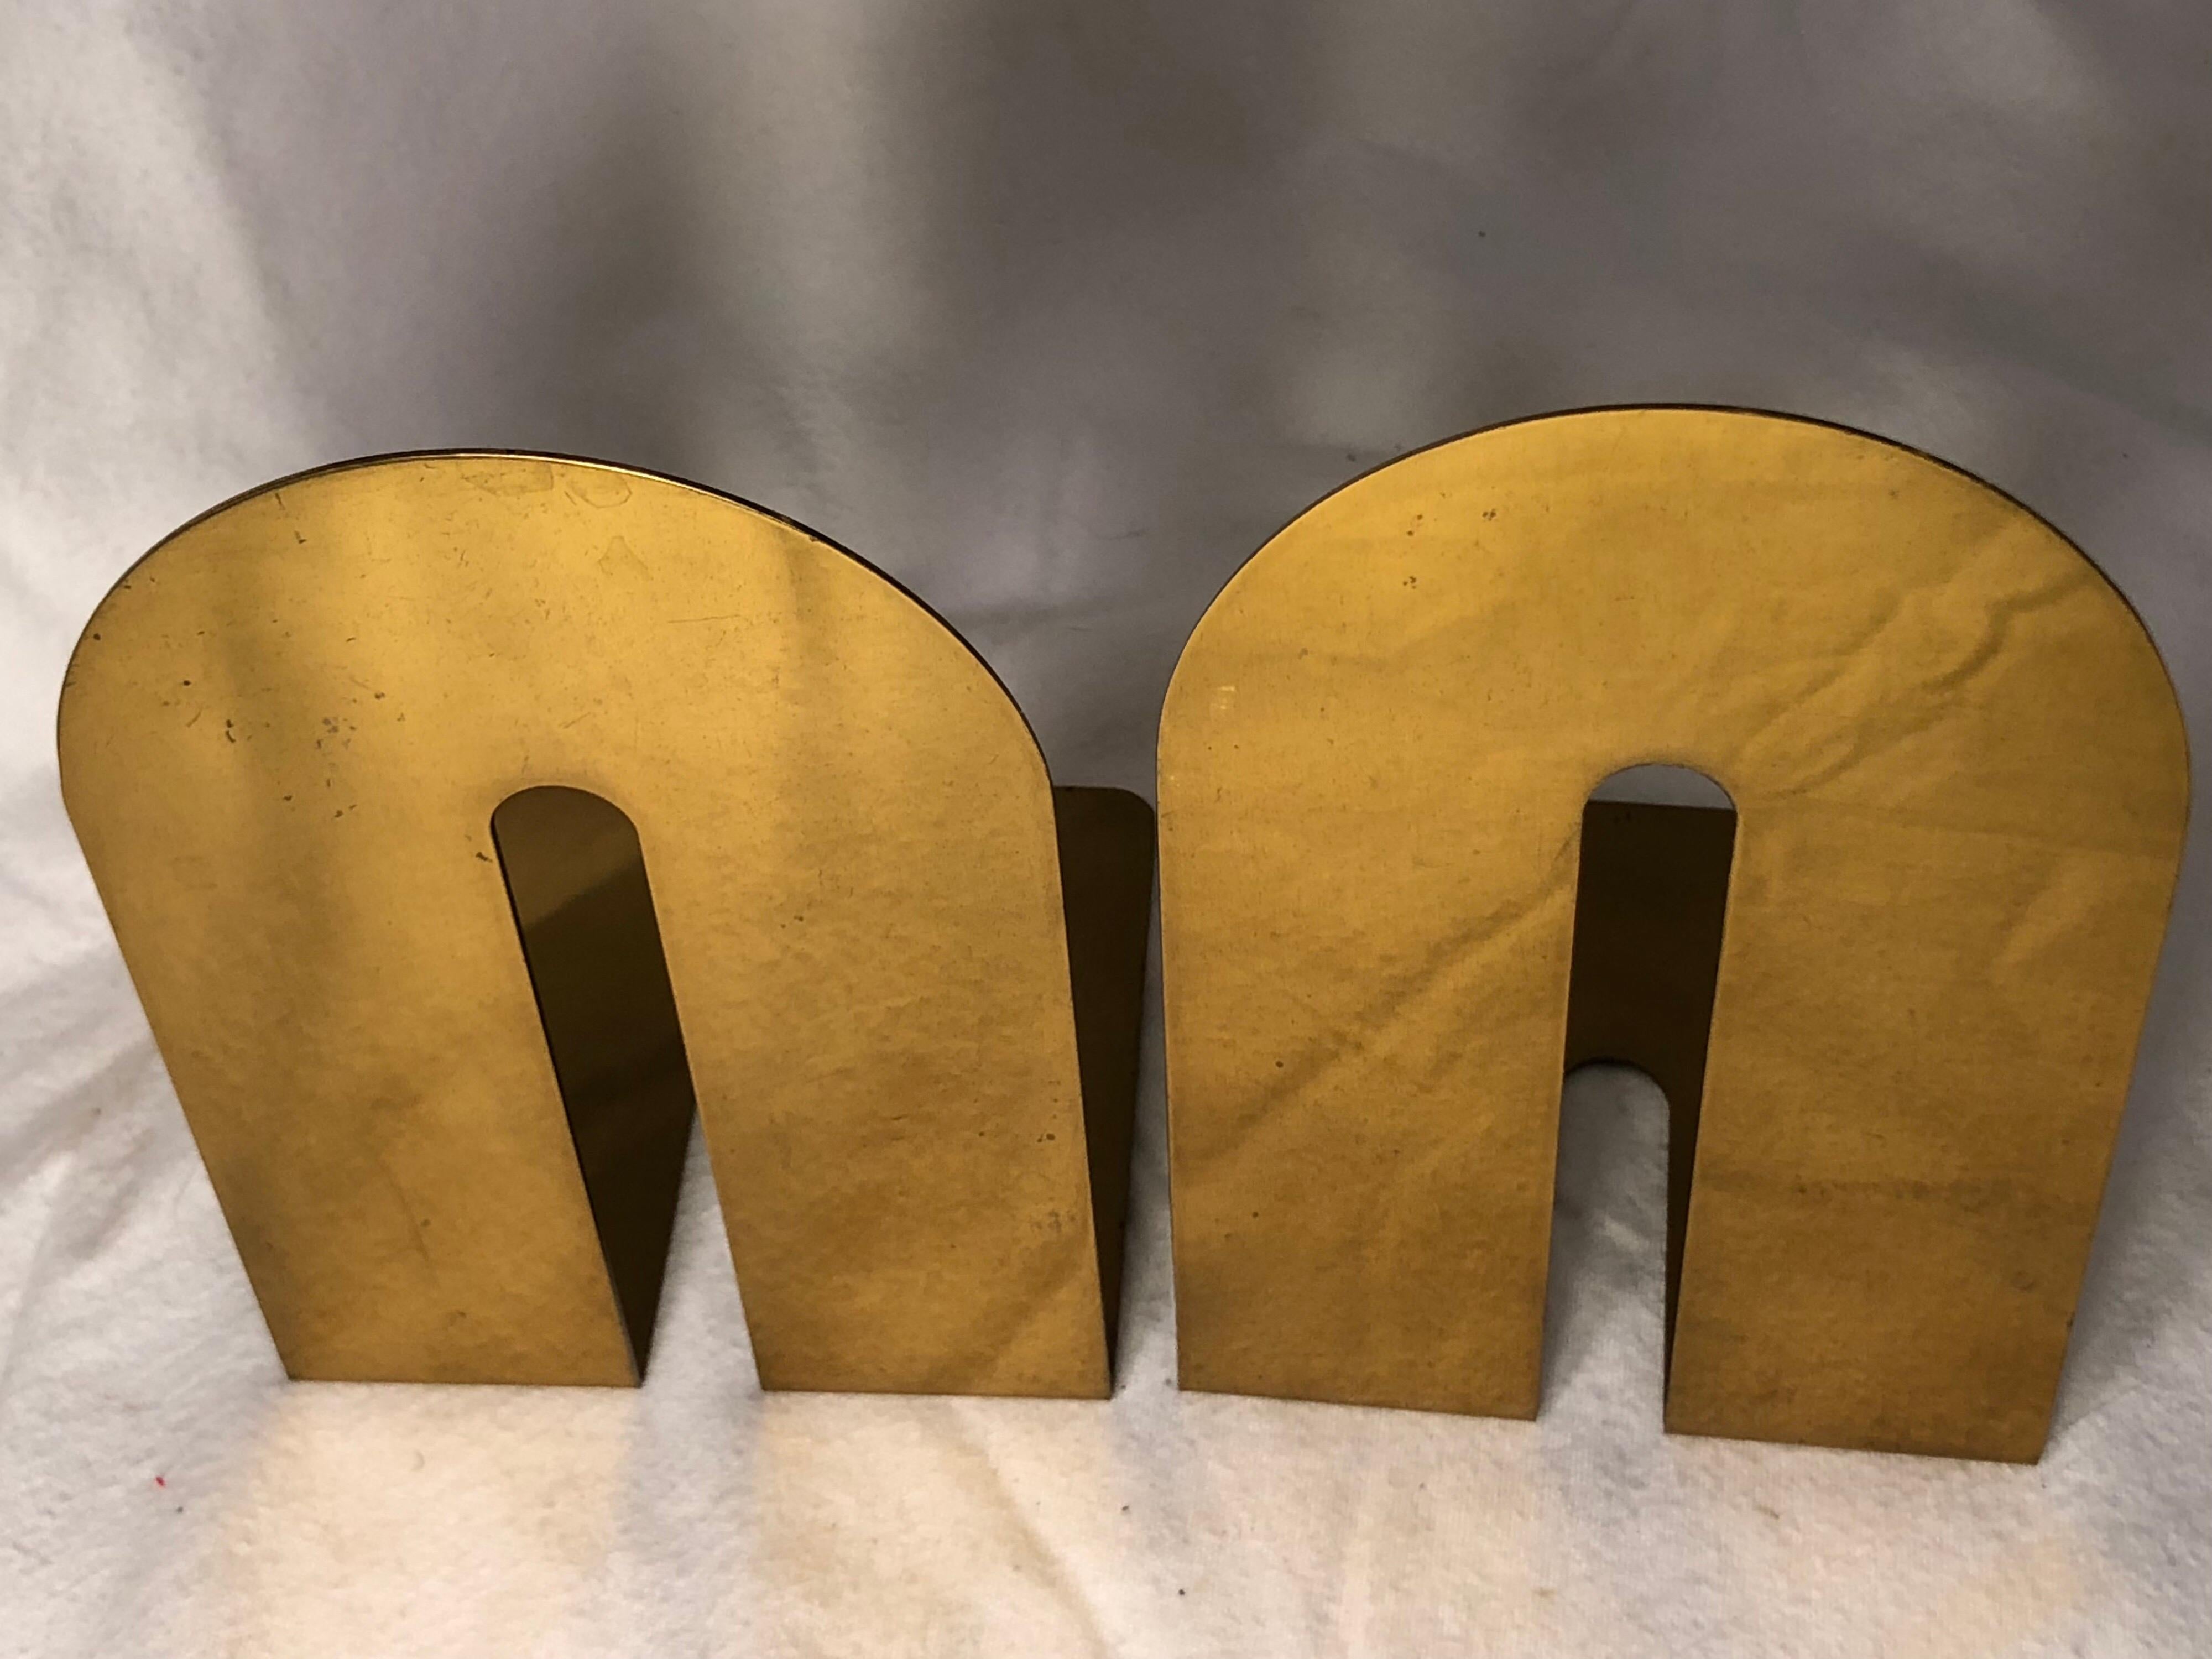 Pair of midcentury brass Walter Von Nessen style bookends. Although Art Deco in design they are from the MOD 1970s period. Perfect accessory for that mod, deco or Minimalist look. Each one measures 4